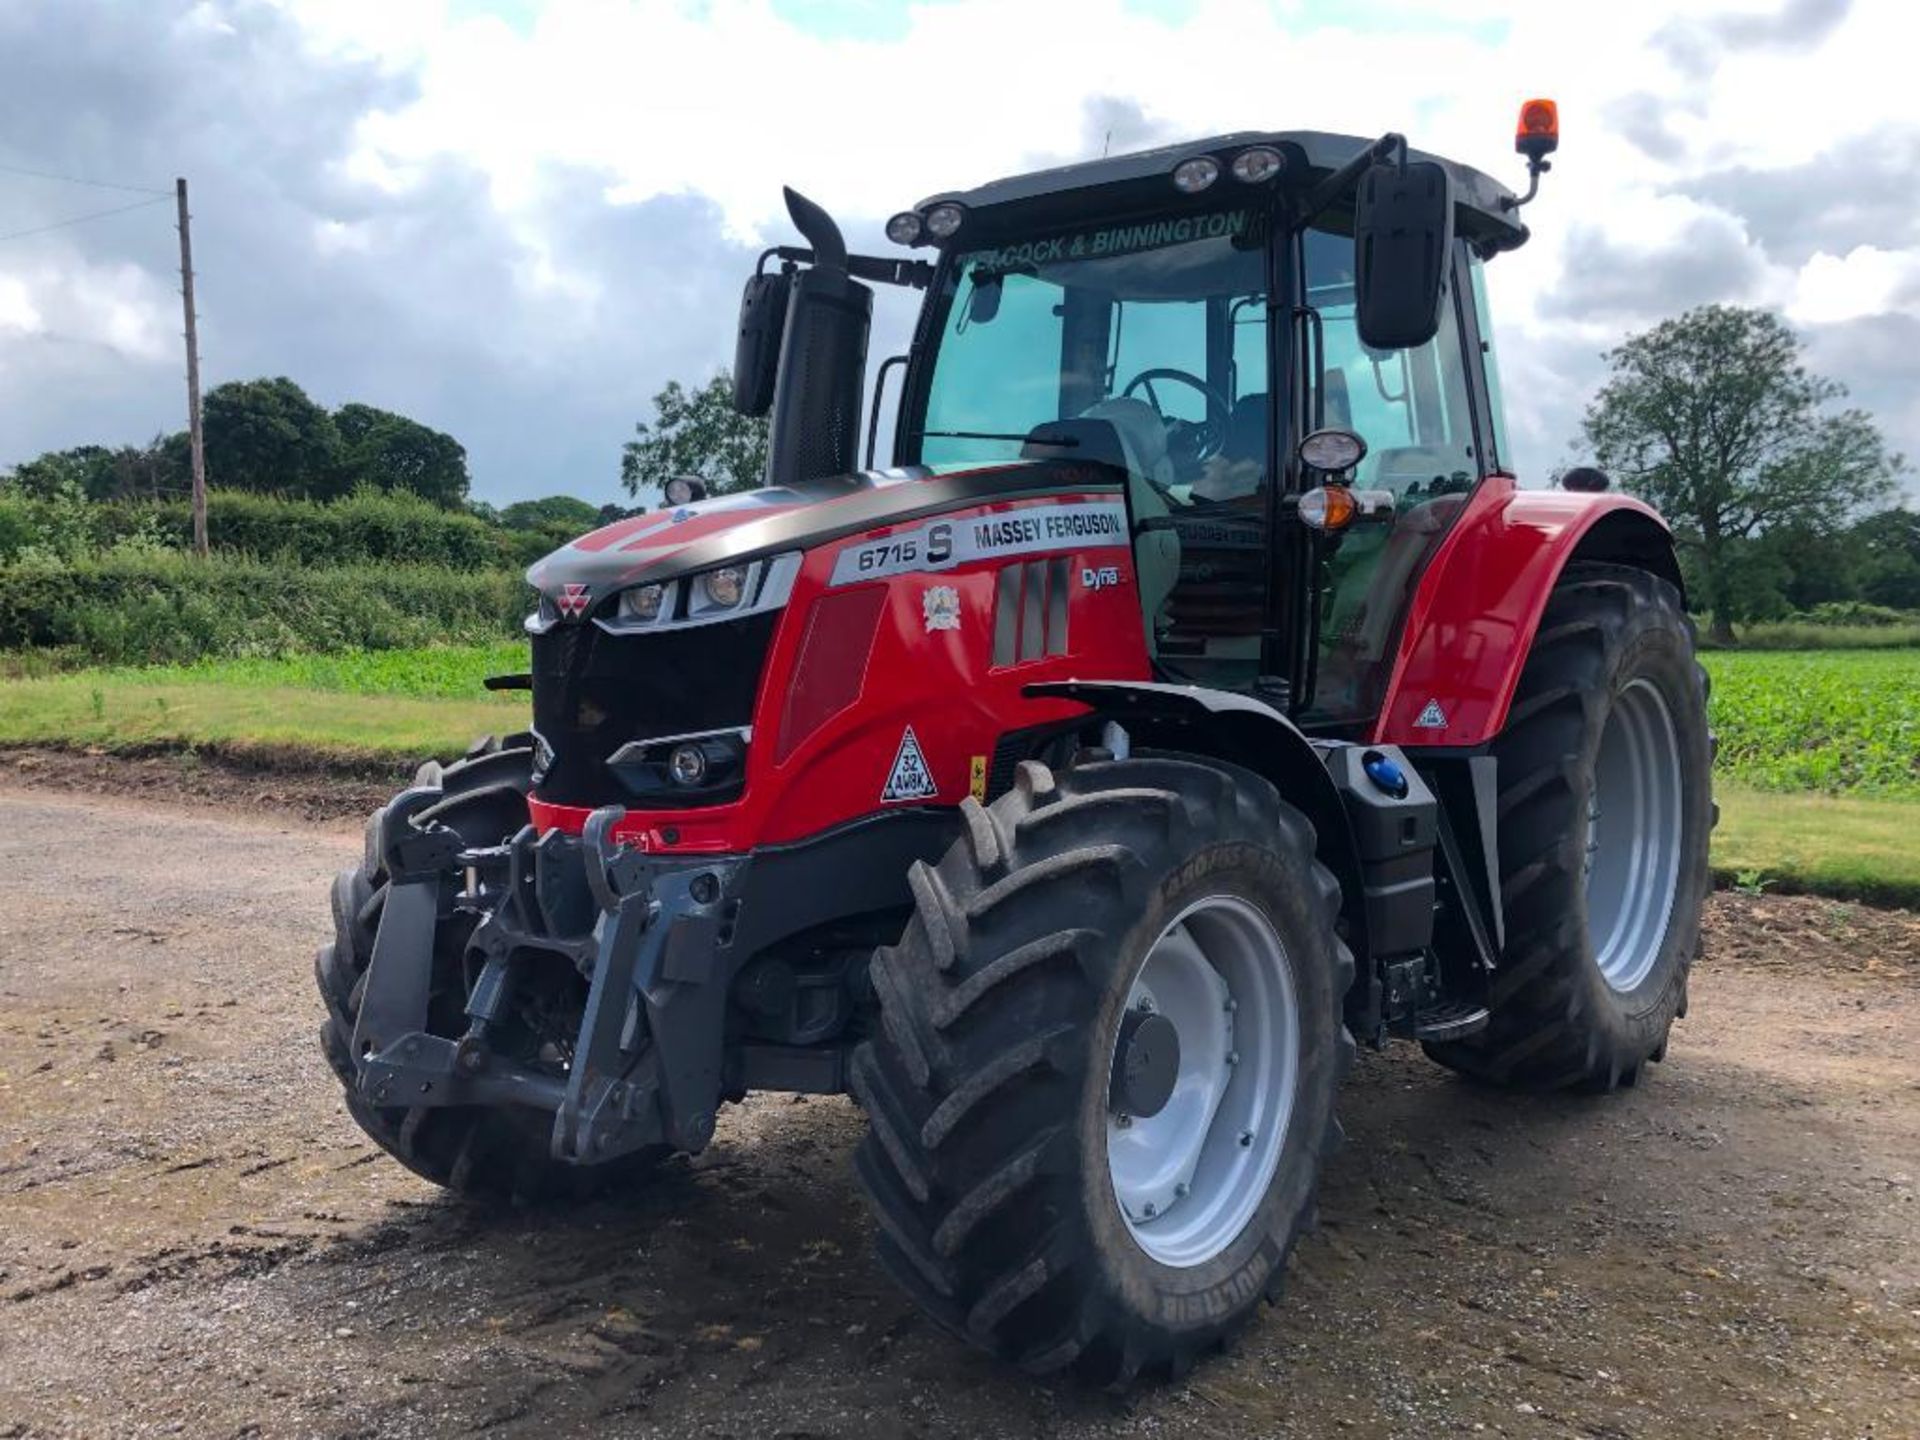 2019 Massey Ferguson 6715 S Dyna 6 50kph 4wd tractor c/w 3 manual spools, front linkage, air brakes, - Image 40 of 41